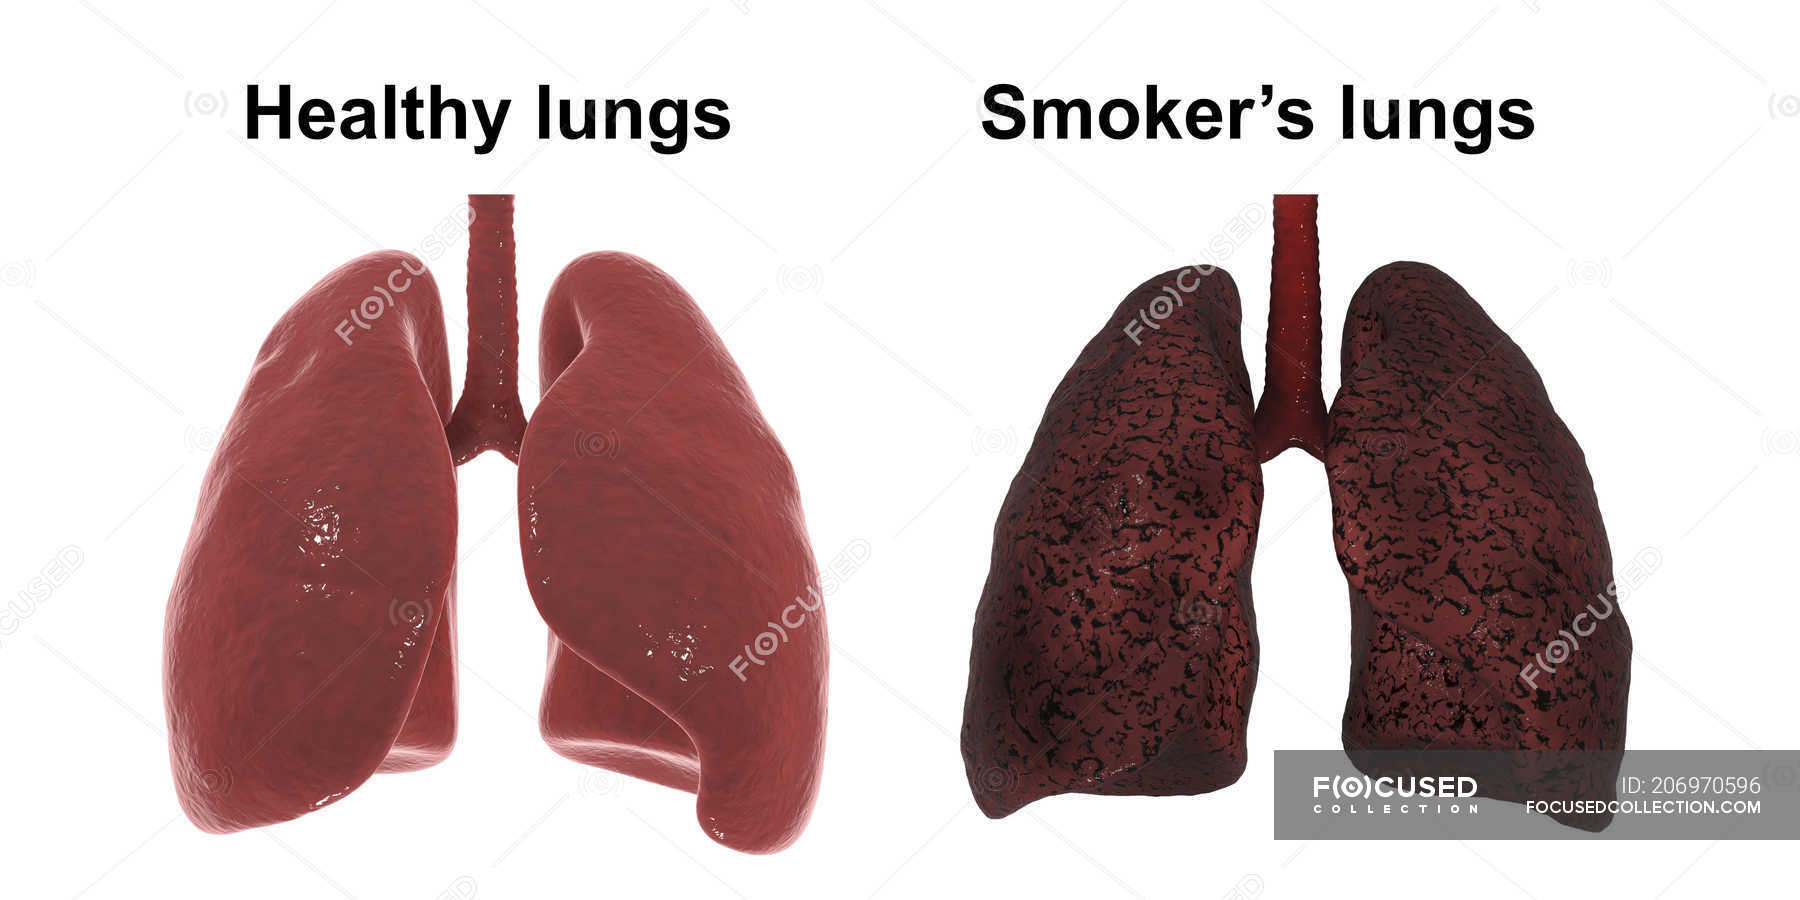 Smoker's Lungs, Illustration And Light Micrograph Stock Image F022/6857 ...